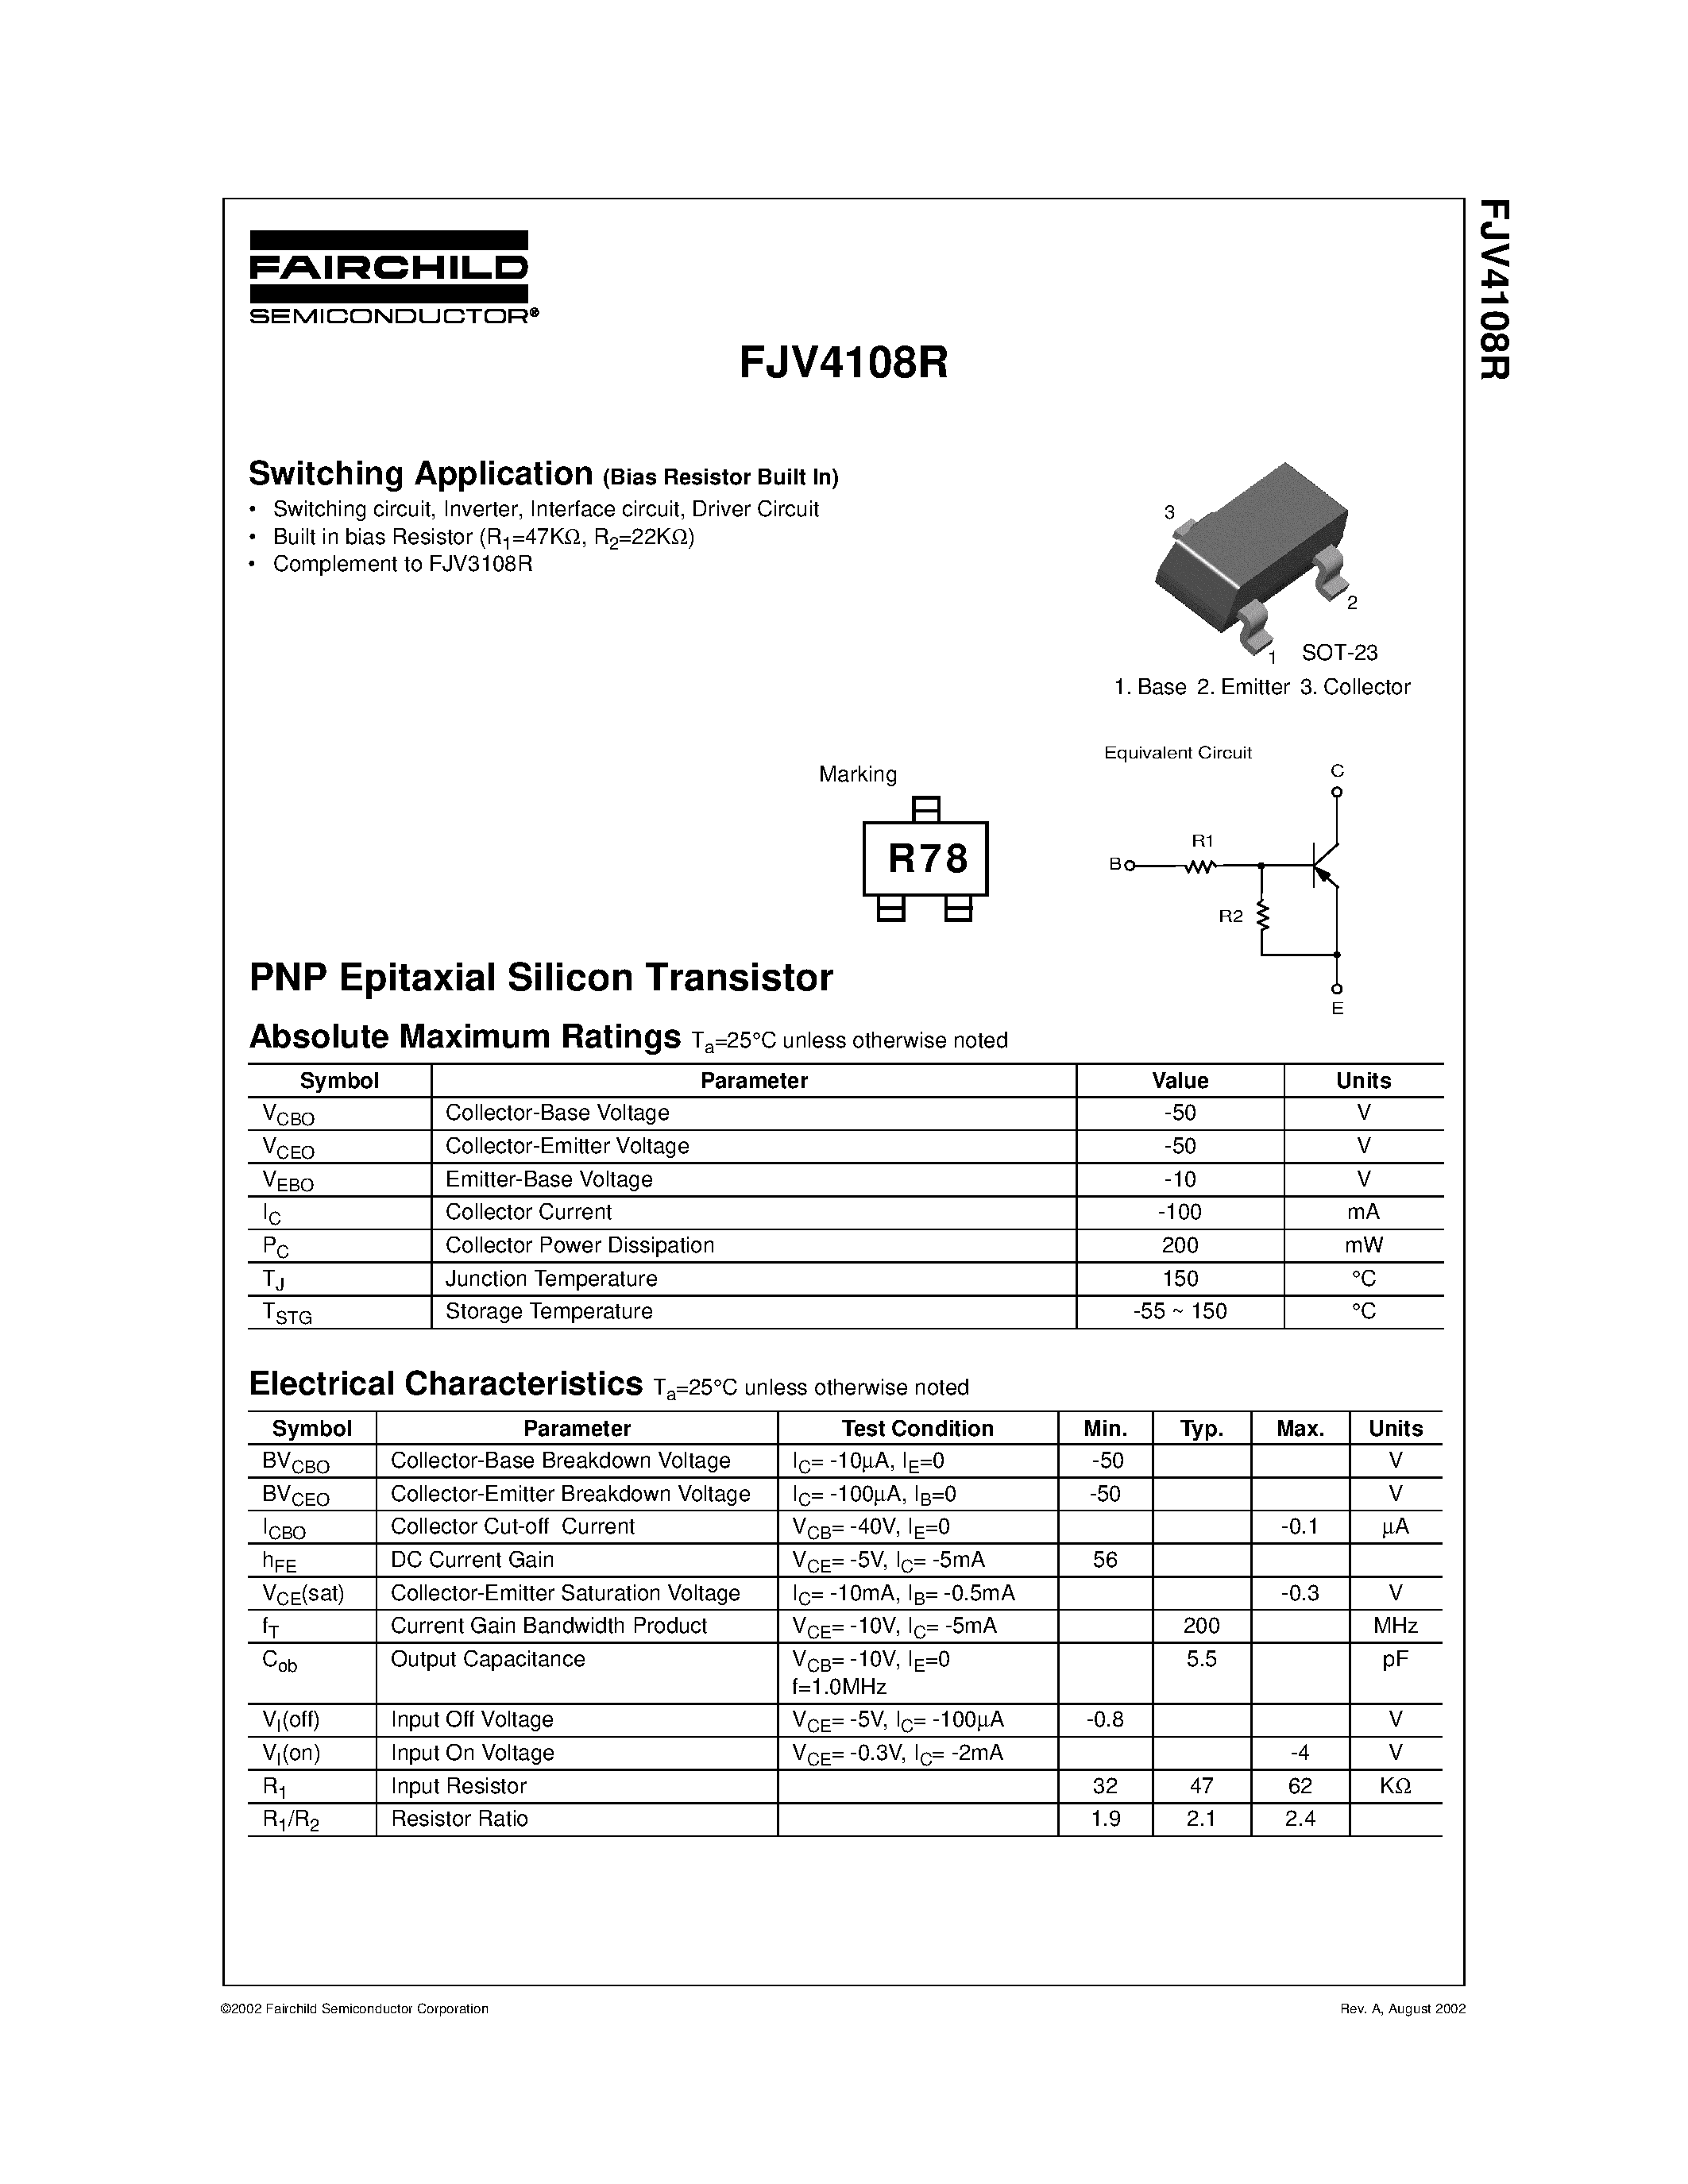 Даташит FJV4108R - PNP Epitaxial Silicon Transistor страница 1